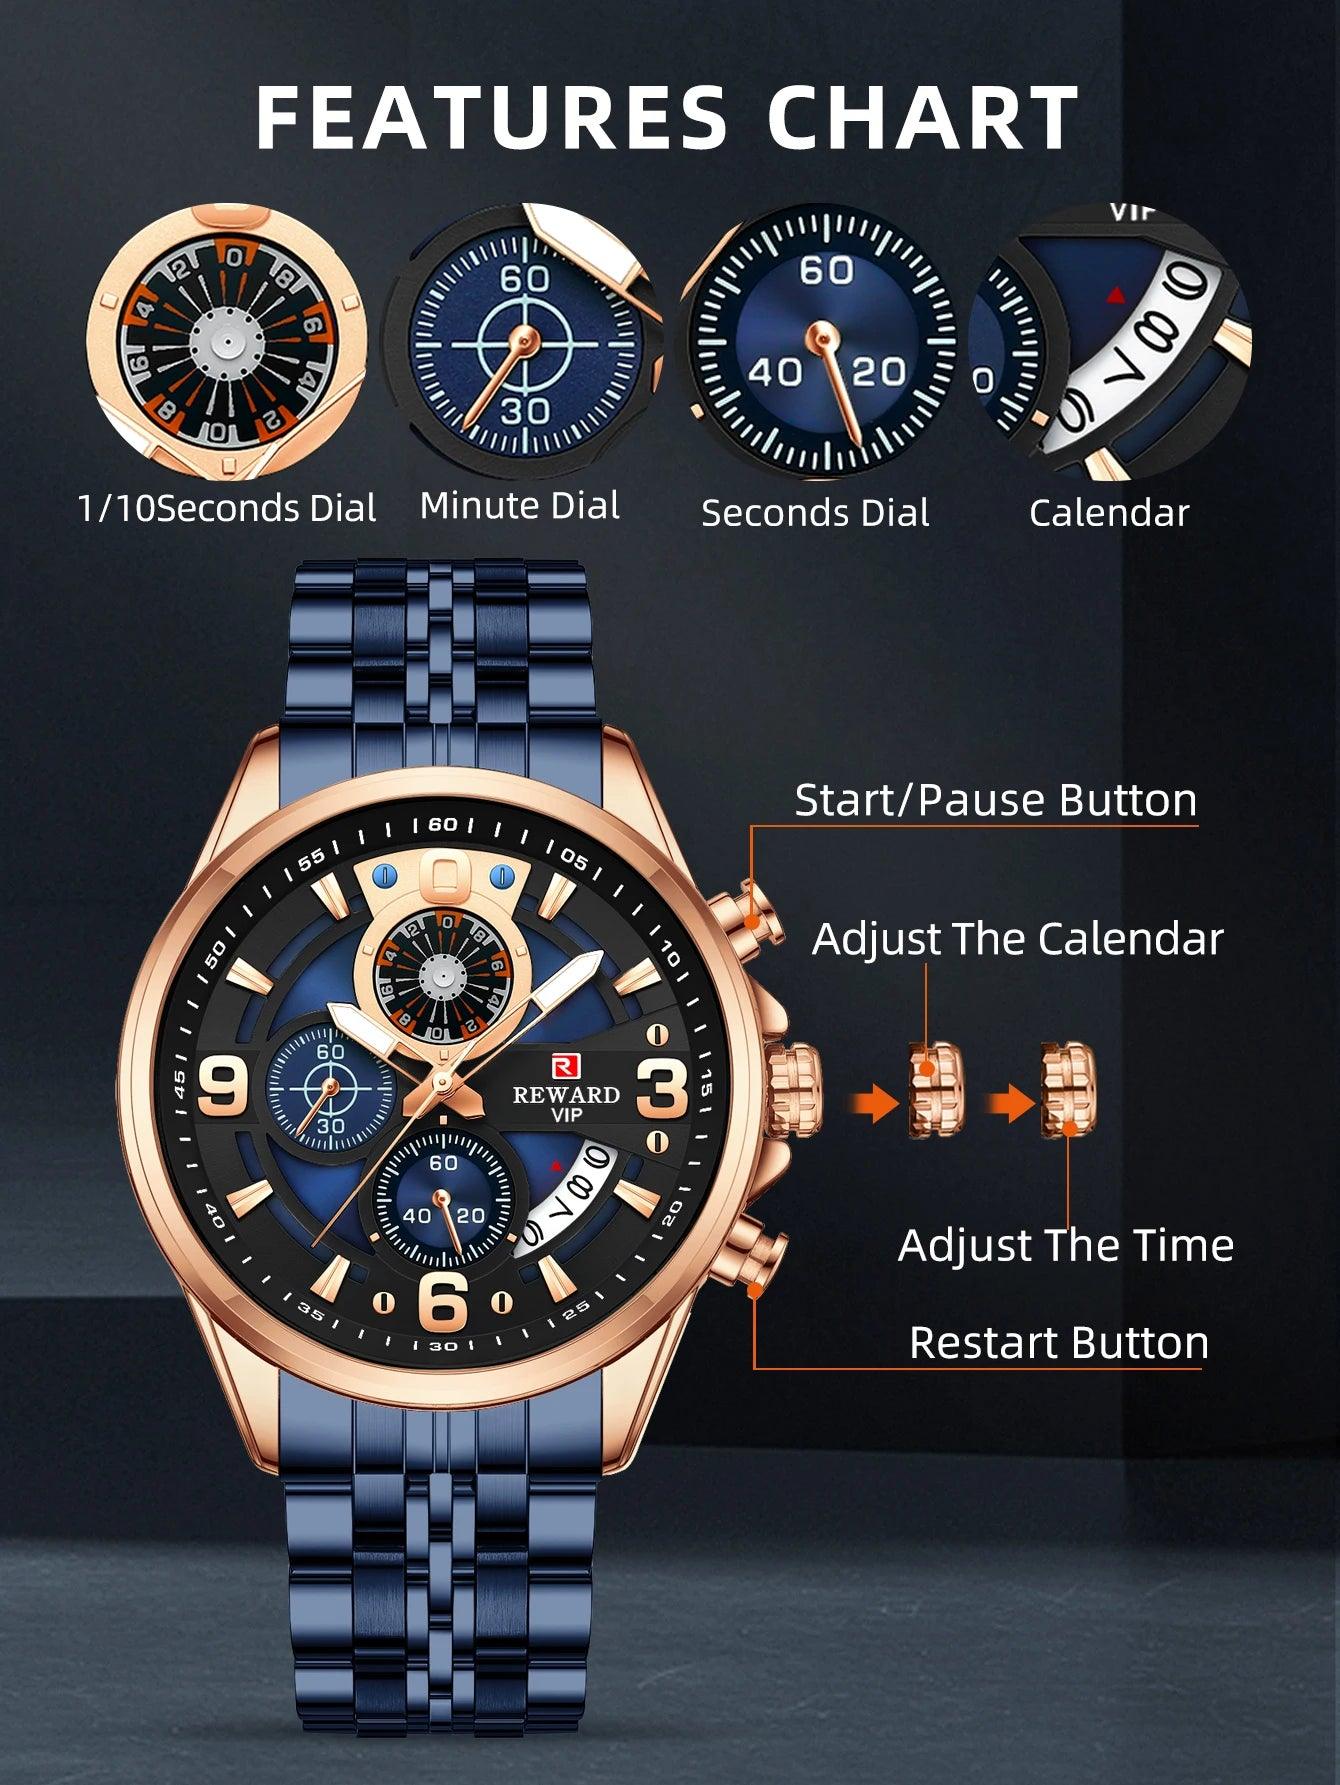 New Arrival Top Brand VIP Design Quartz Waterproof Sport Stainless Steel Chronograph Luminous Watches for Men - The Jewellery Supermarket